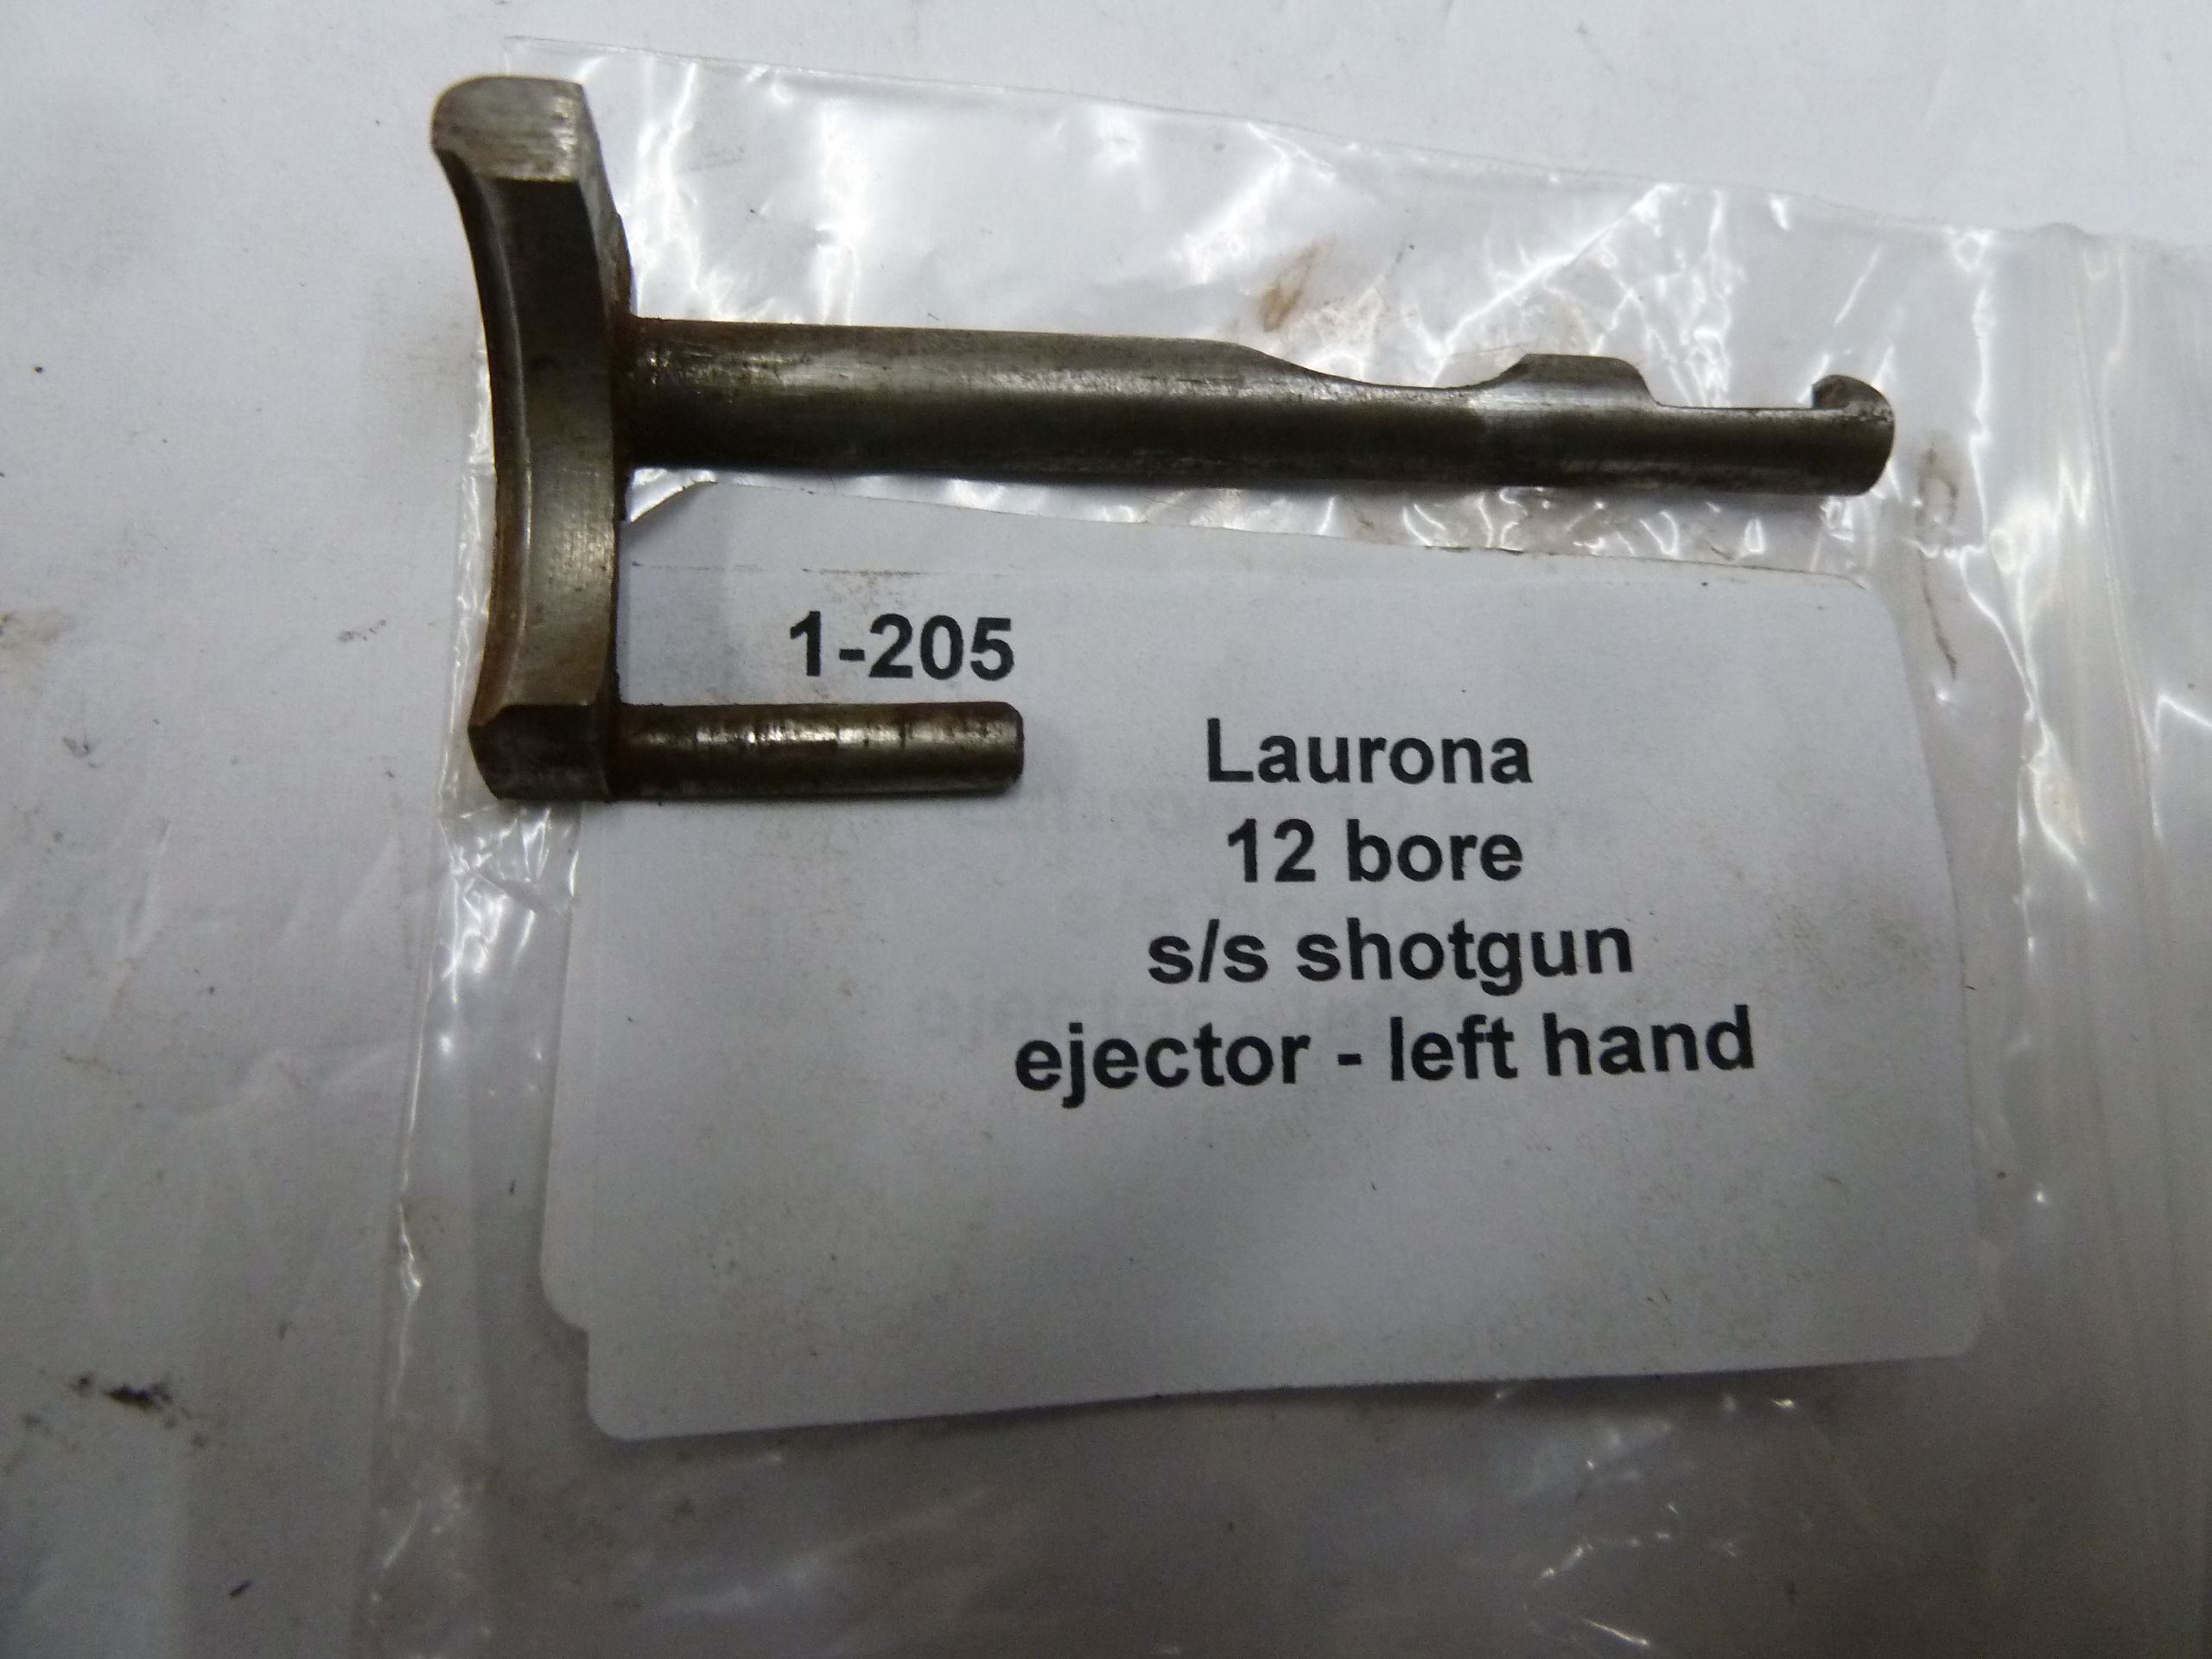 Laurona ejector left hand